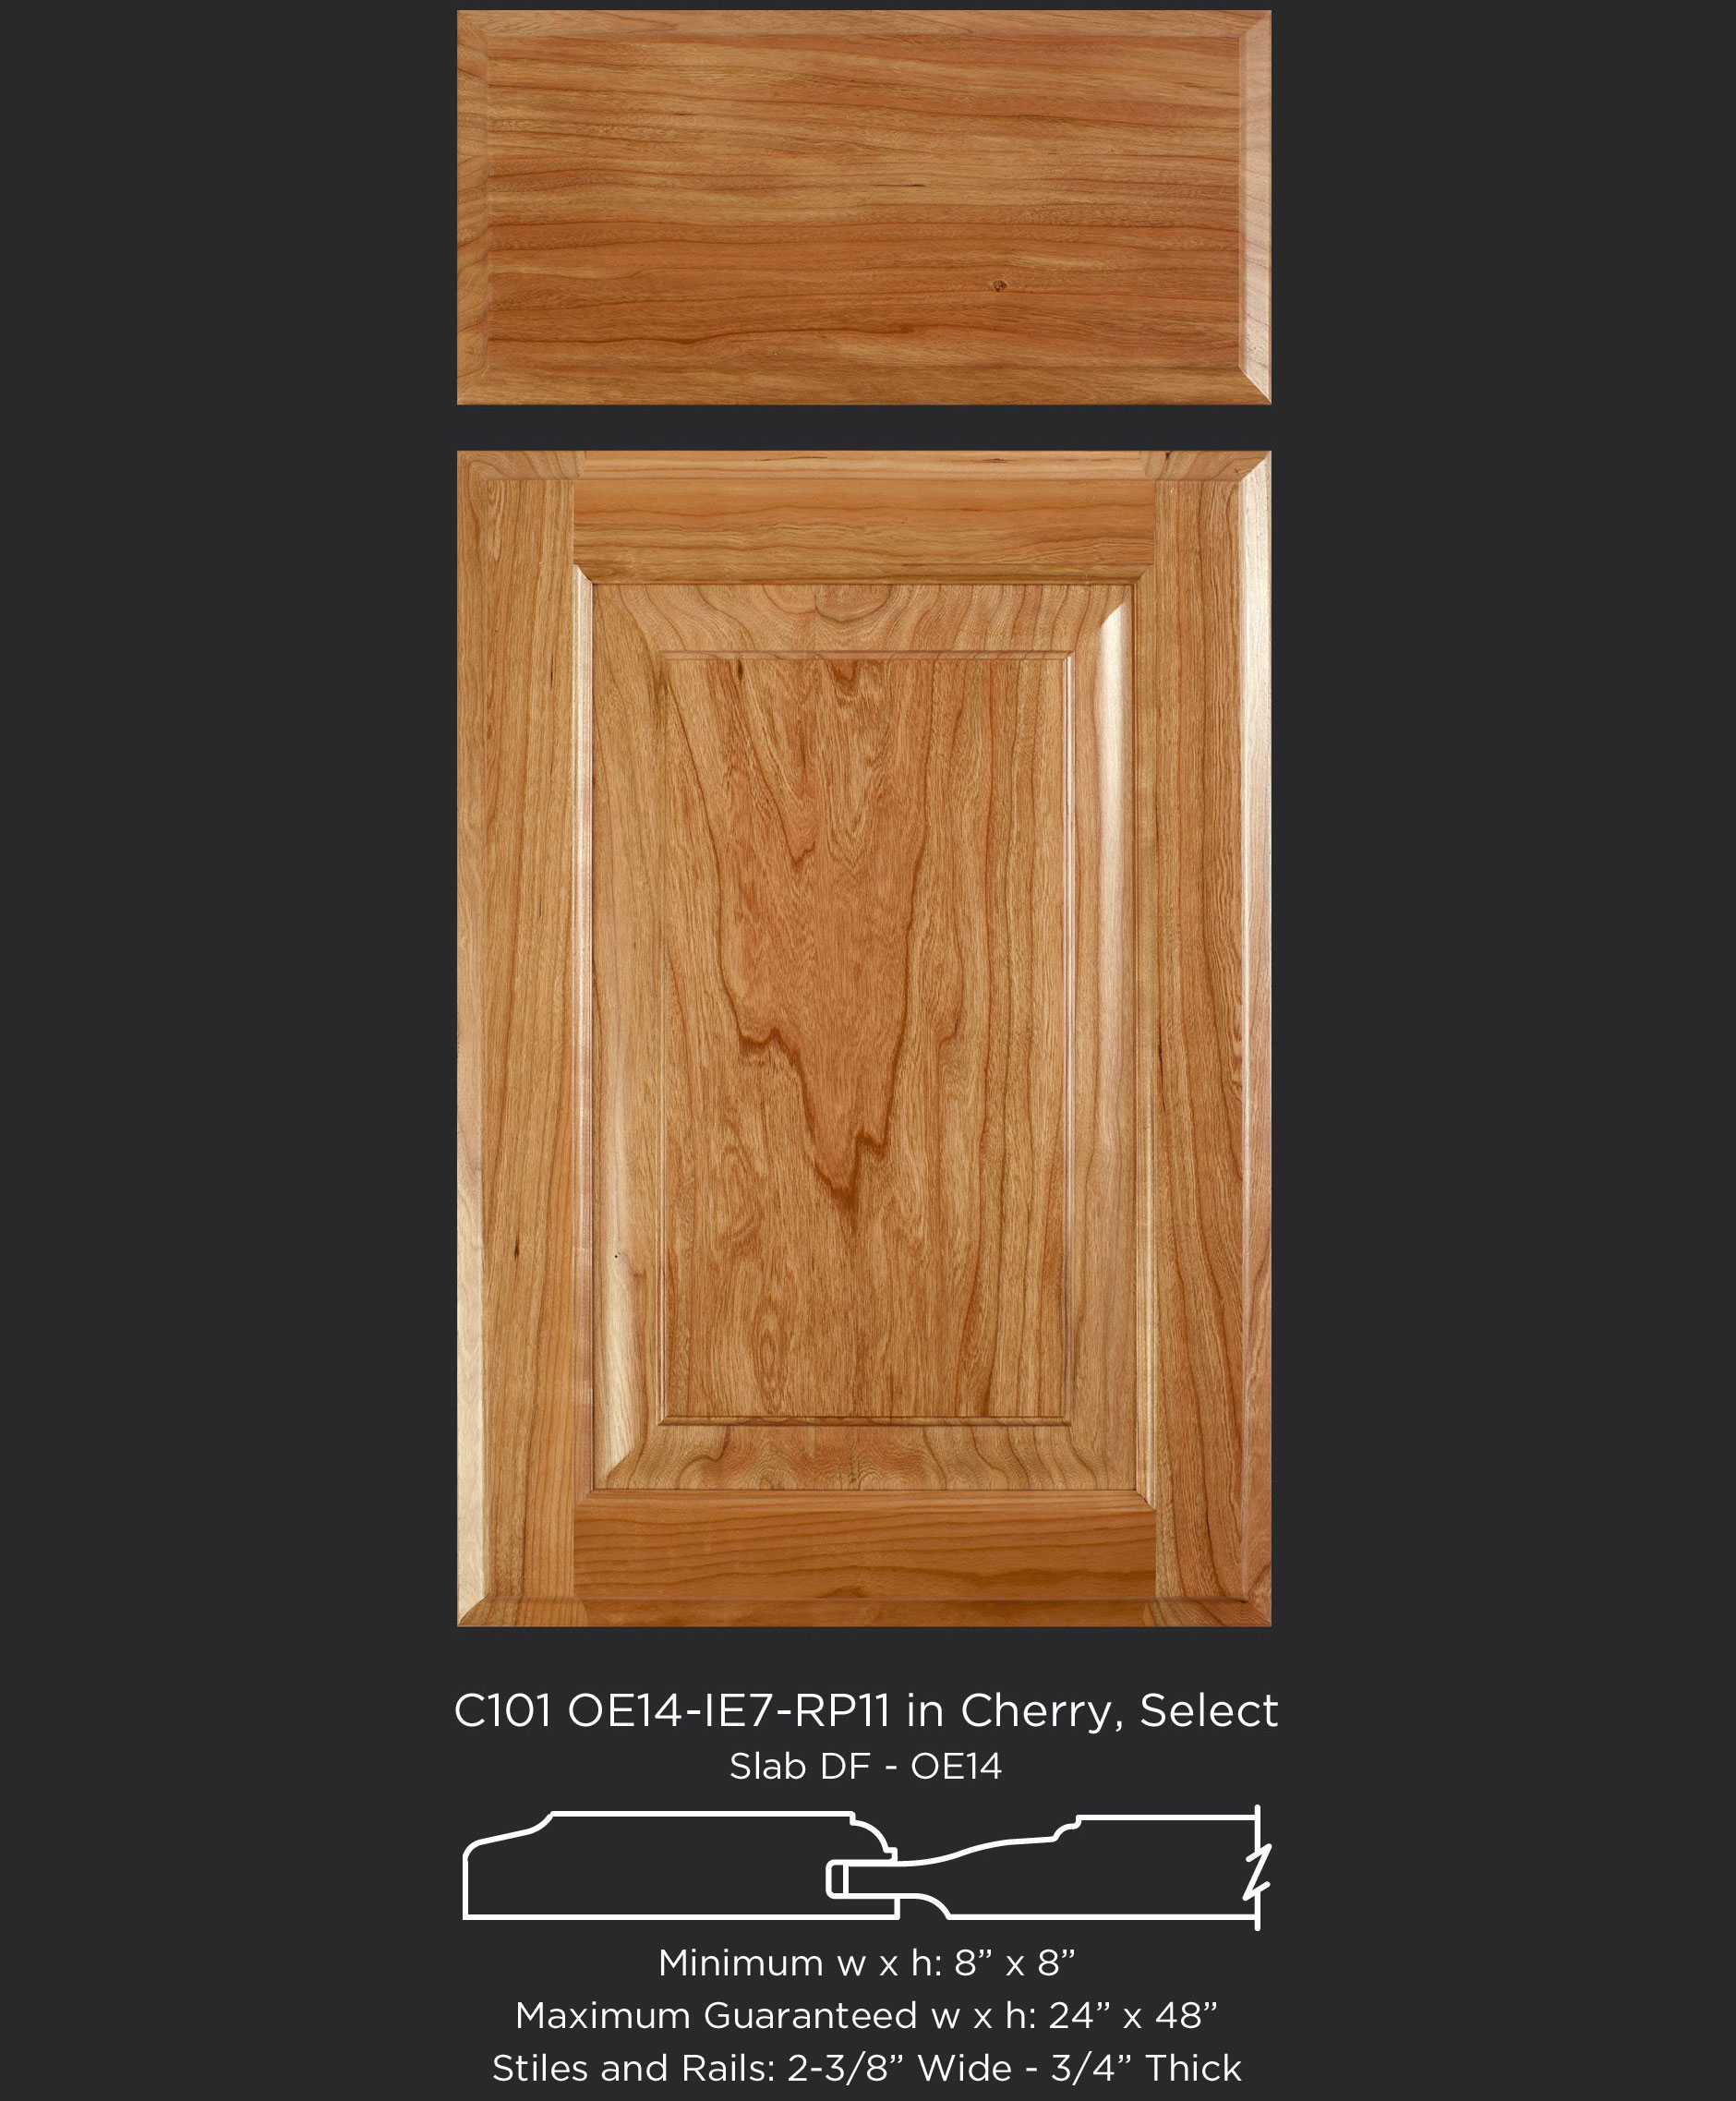 Cope and Stick Cabinet Door C101 OE14-IE7-RP11 Cherry, Select and slab drawer front with OE14